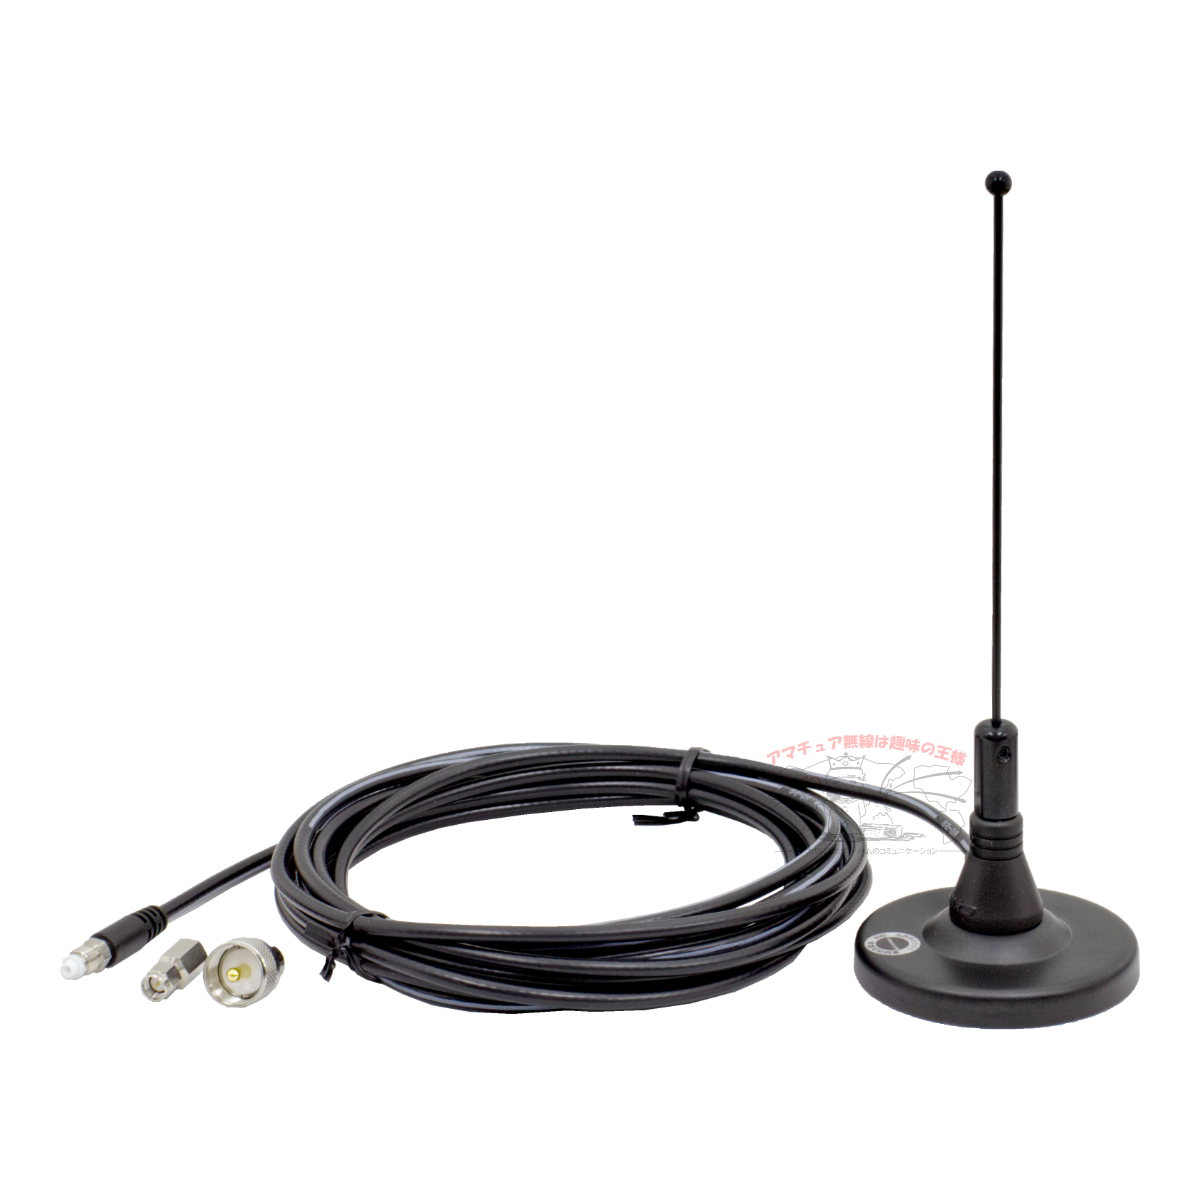 MA-351H comet 351MHz digital simple wireless car magnet height profit antenna MP.SMAP connector Short Element attached 